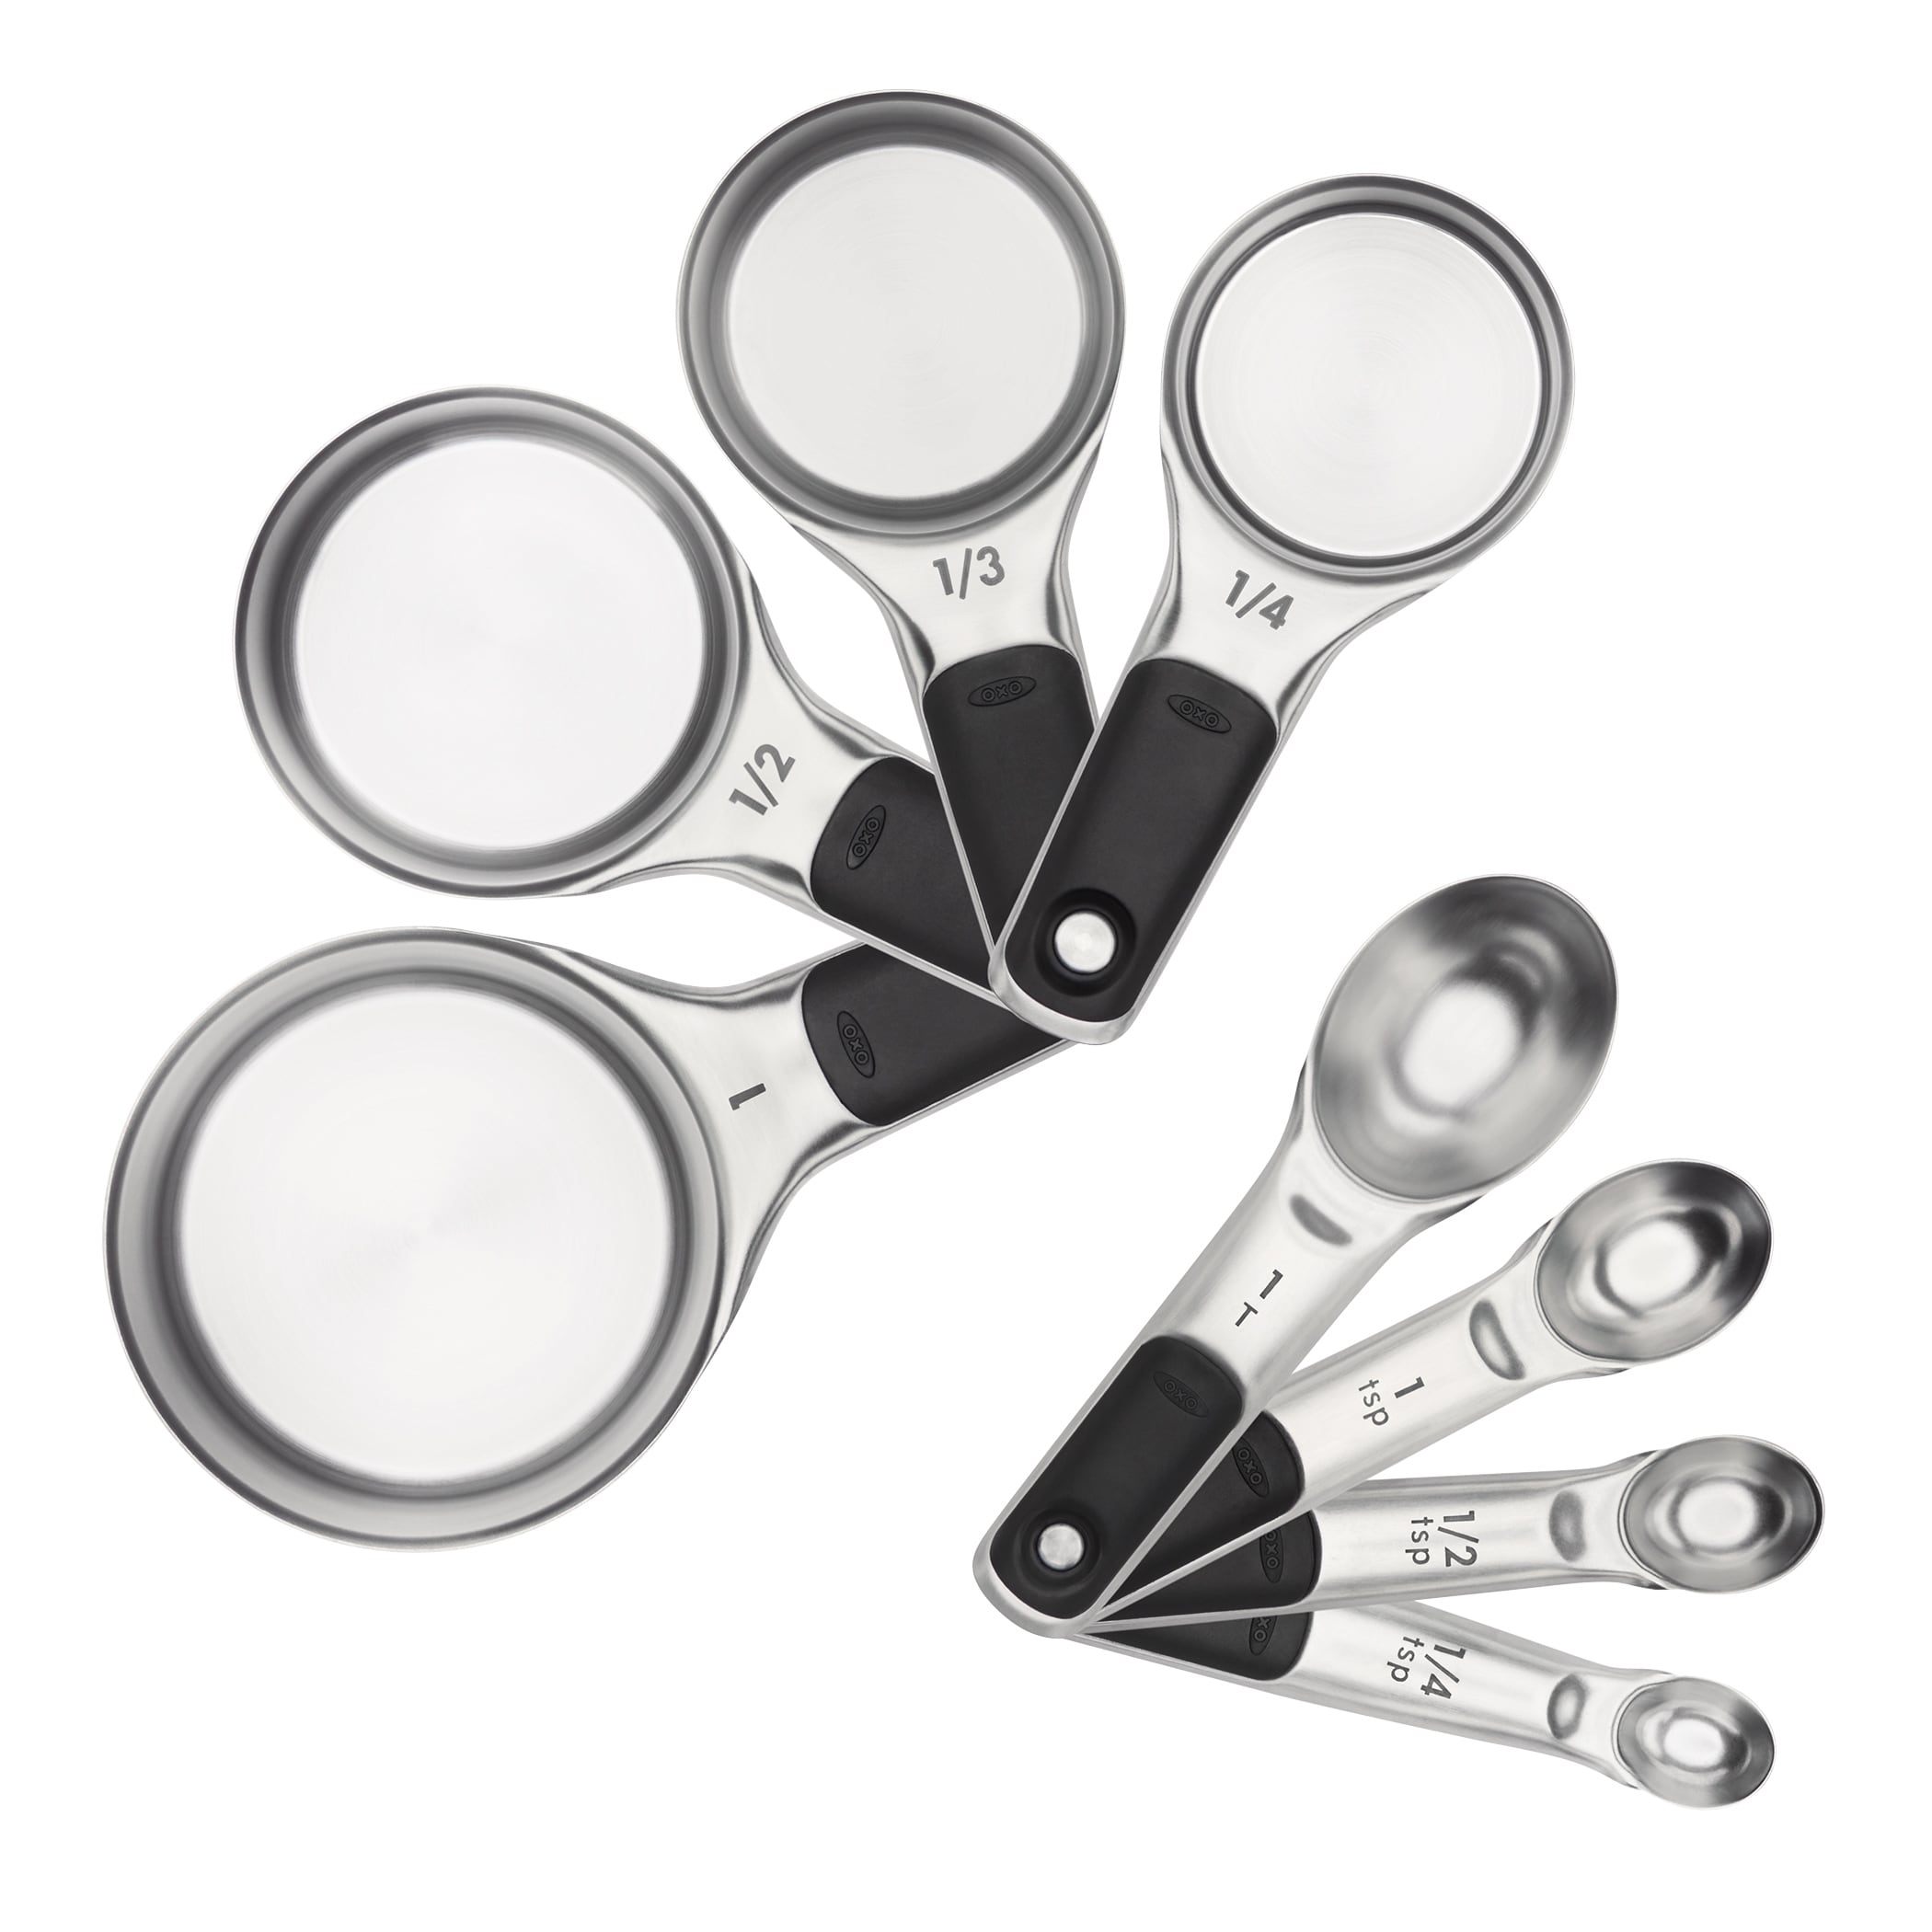 https://ak1.ostkcdn.com/images/products/is/images/direct/00f0ca15b0c6dc495975f4c1281c1cd203bd91a2/OXO-Good-Grips-Stainless-Steel-Measuring-Cups-and-Spoon-Set.jpg